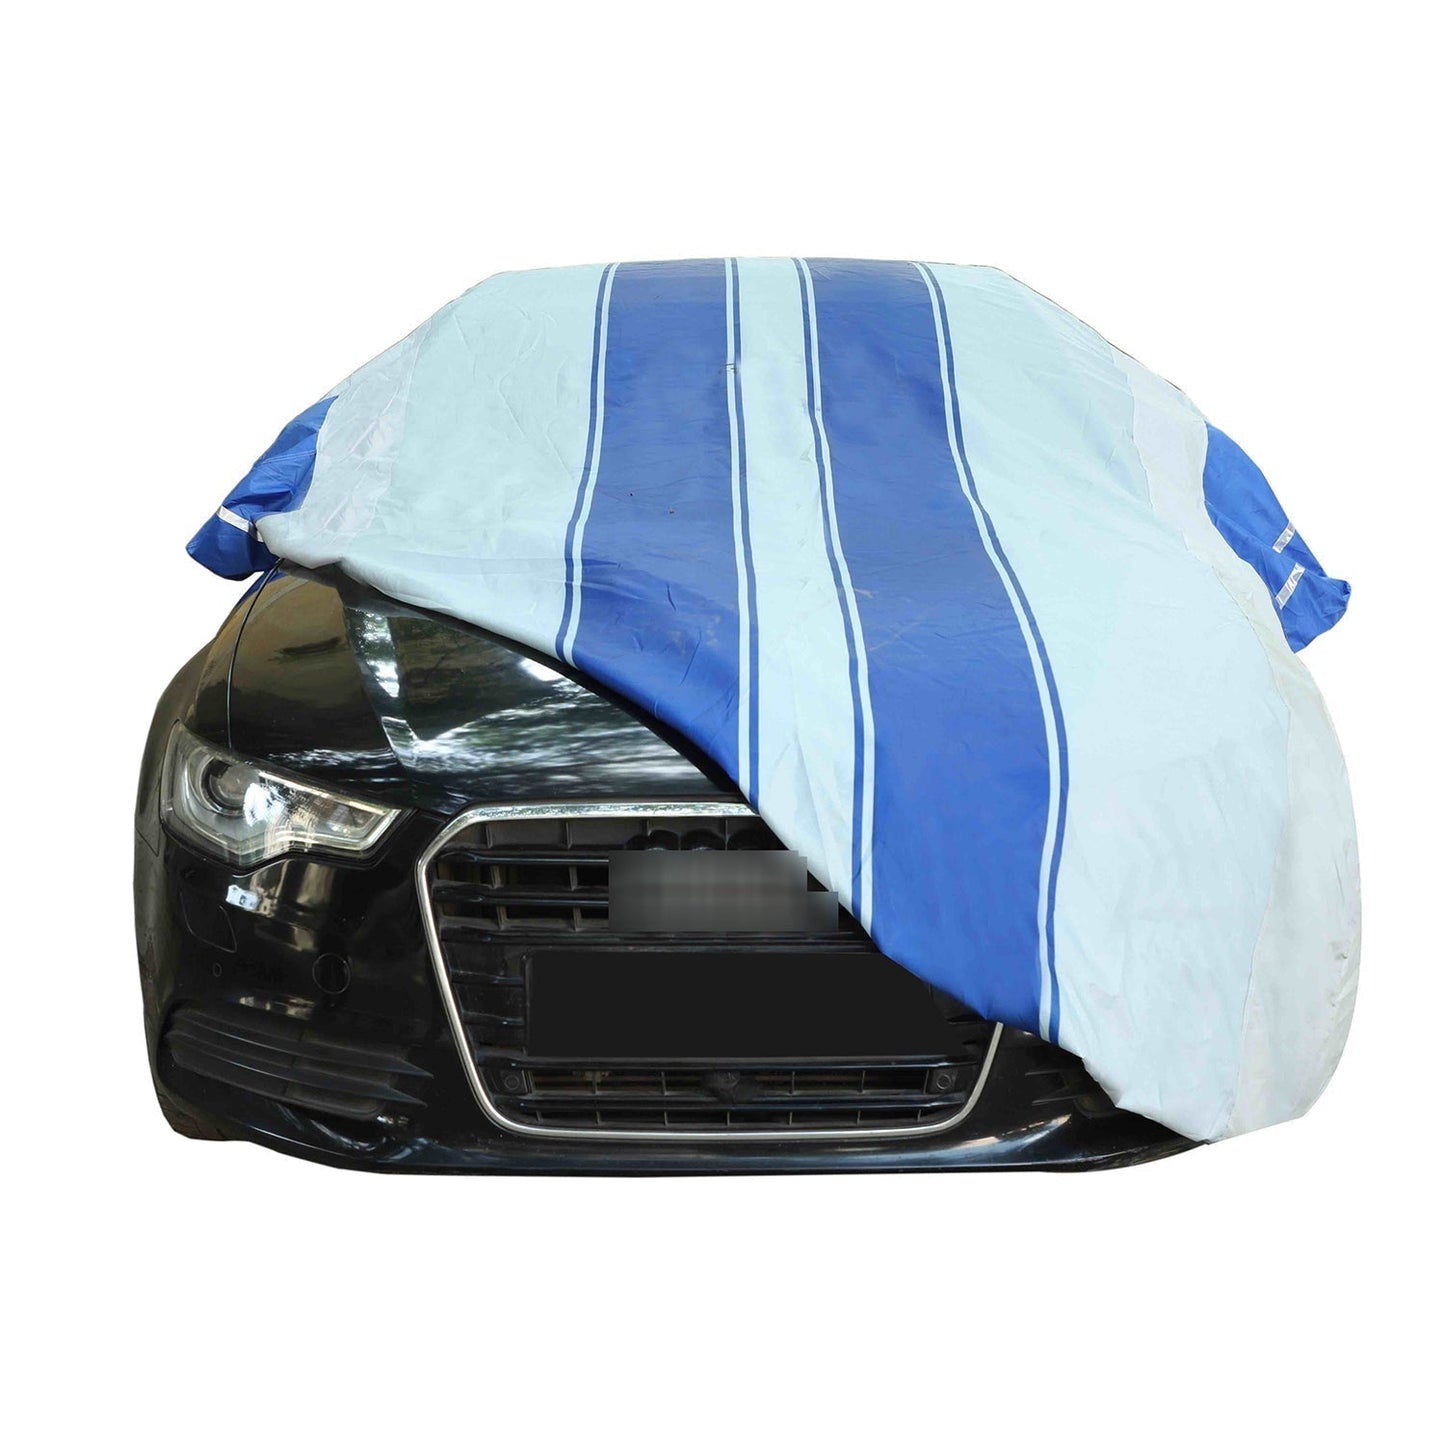 Oshotto 100% Blue dustproof and Water Resistant Car Body Cover with Mirror Pockets For Mercedes Benz B-Class